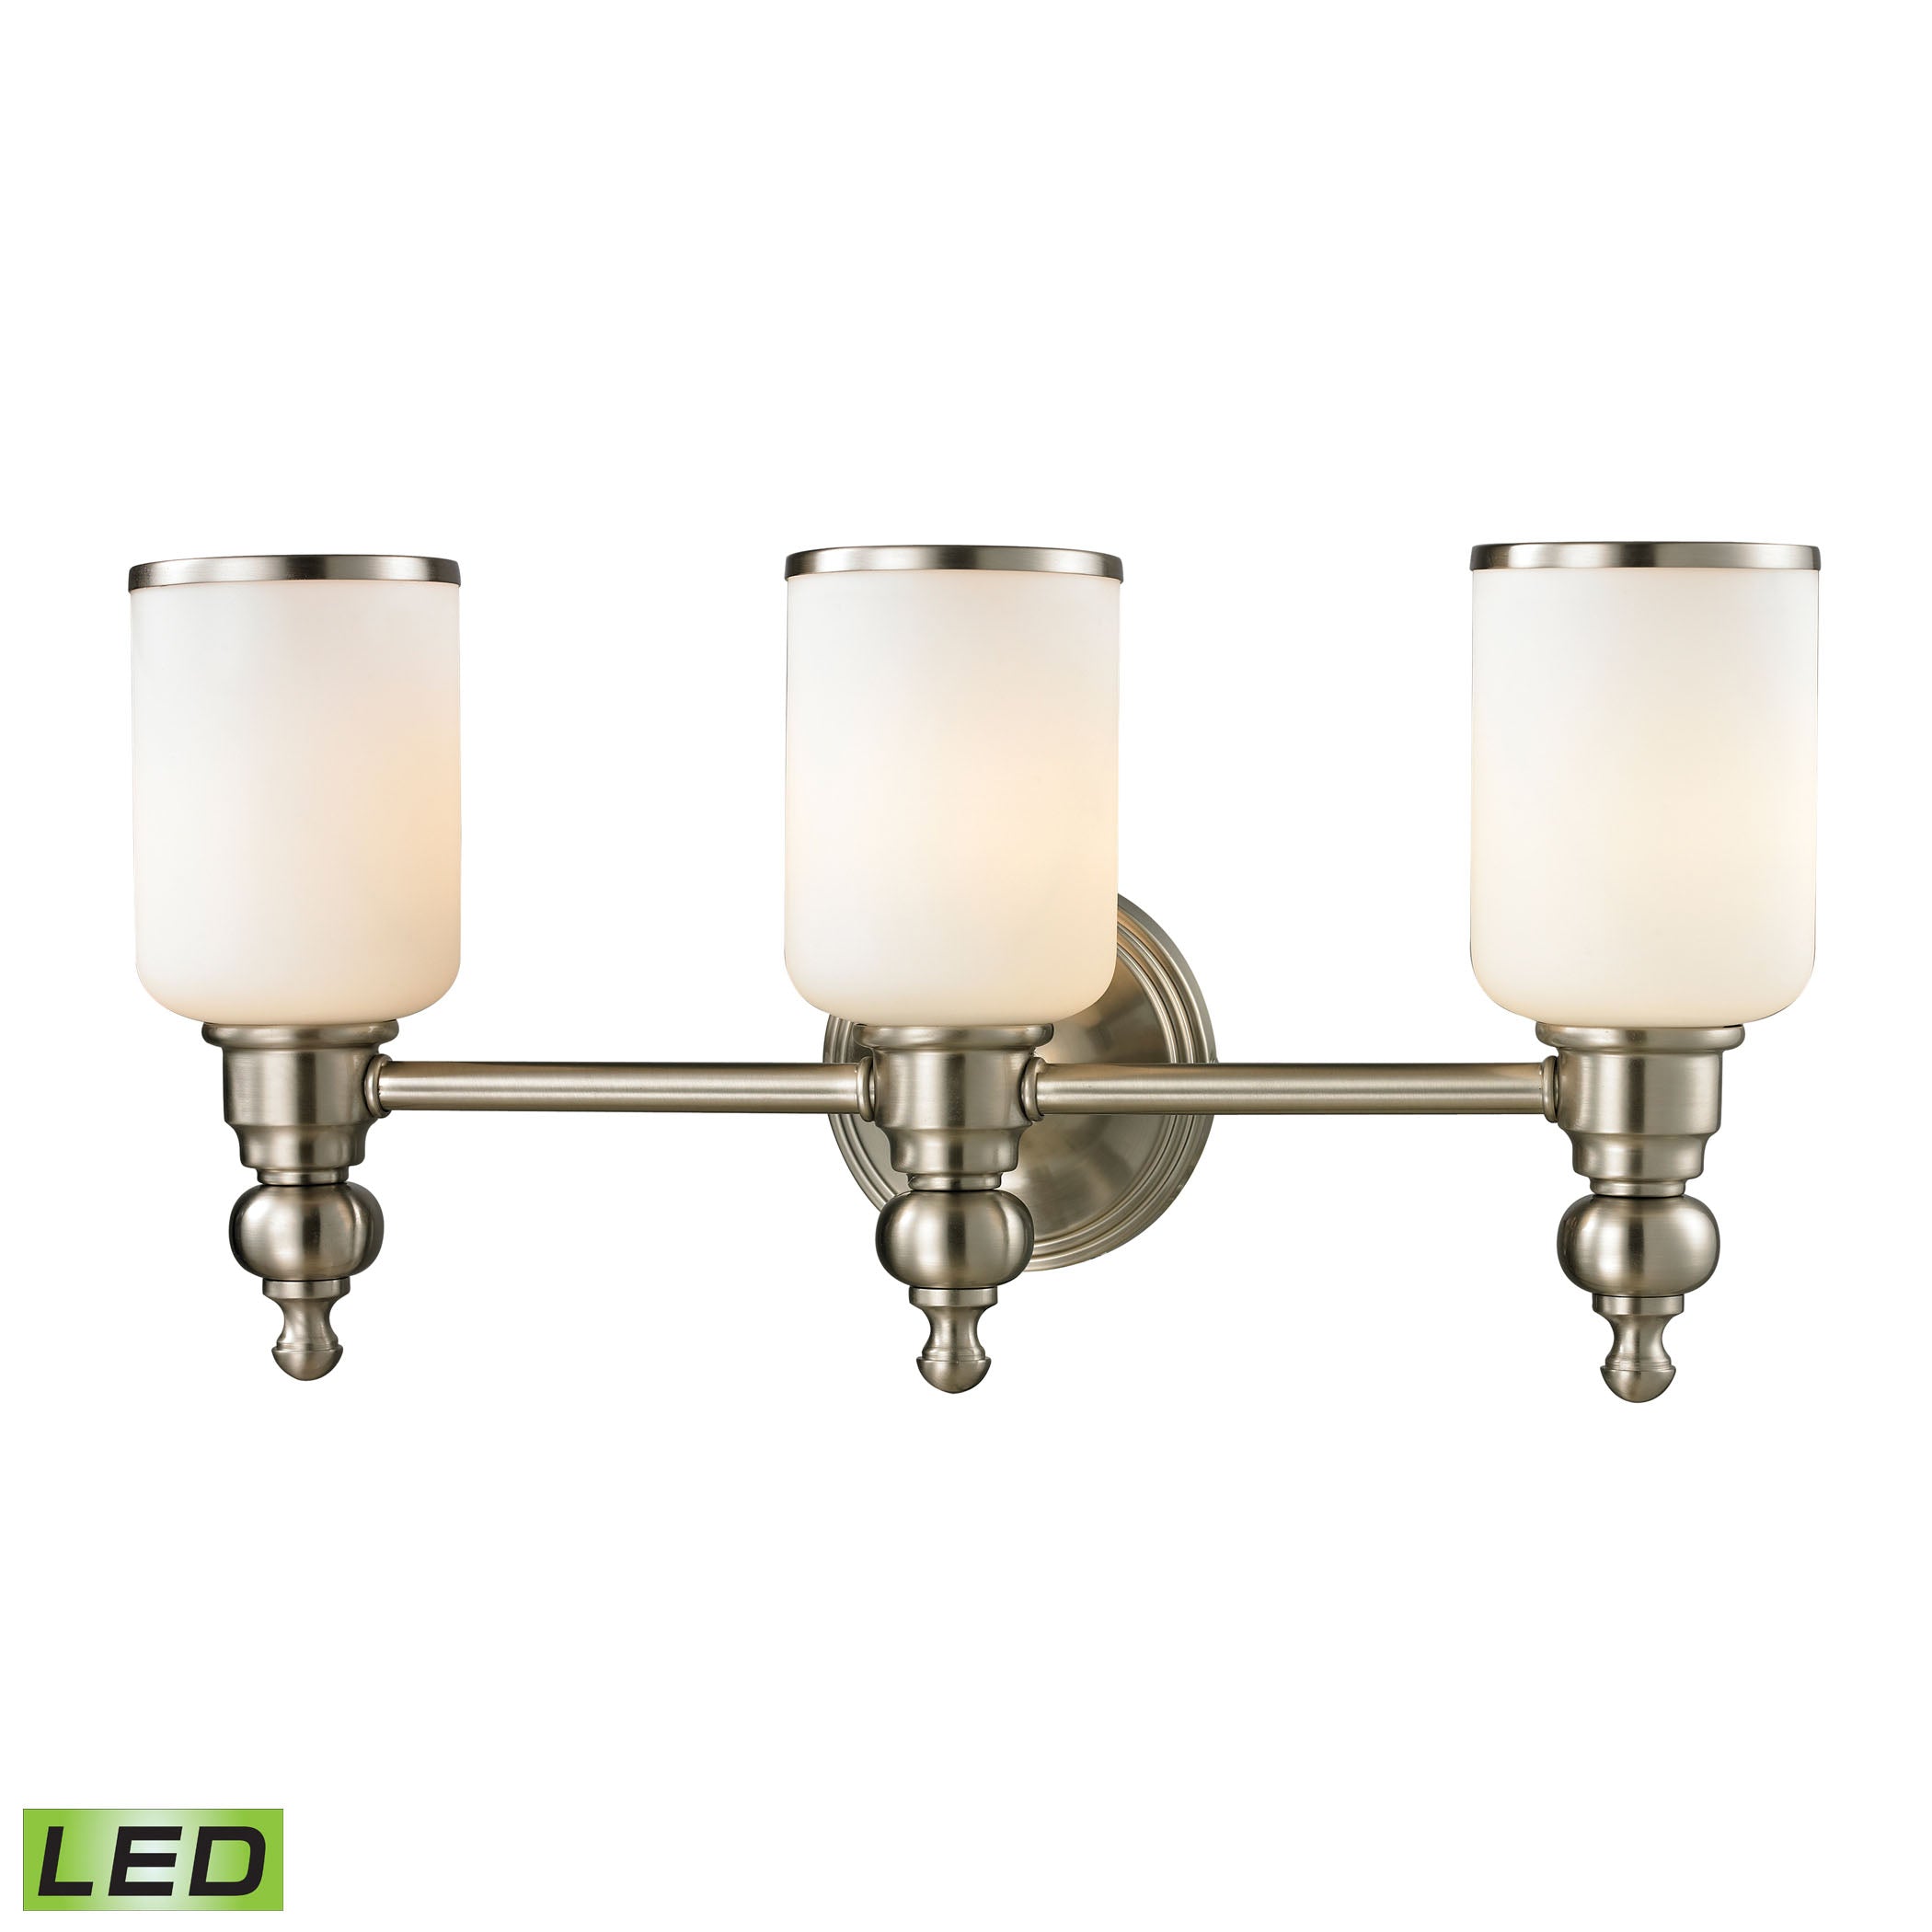 ELK Lighting 11582/3-LED Bristol 3-Light Vanity Lamp in Brushed Nickel with Opal White Blown Glass - Includes LED Bulbs